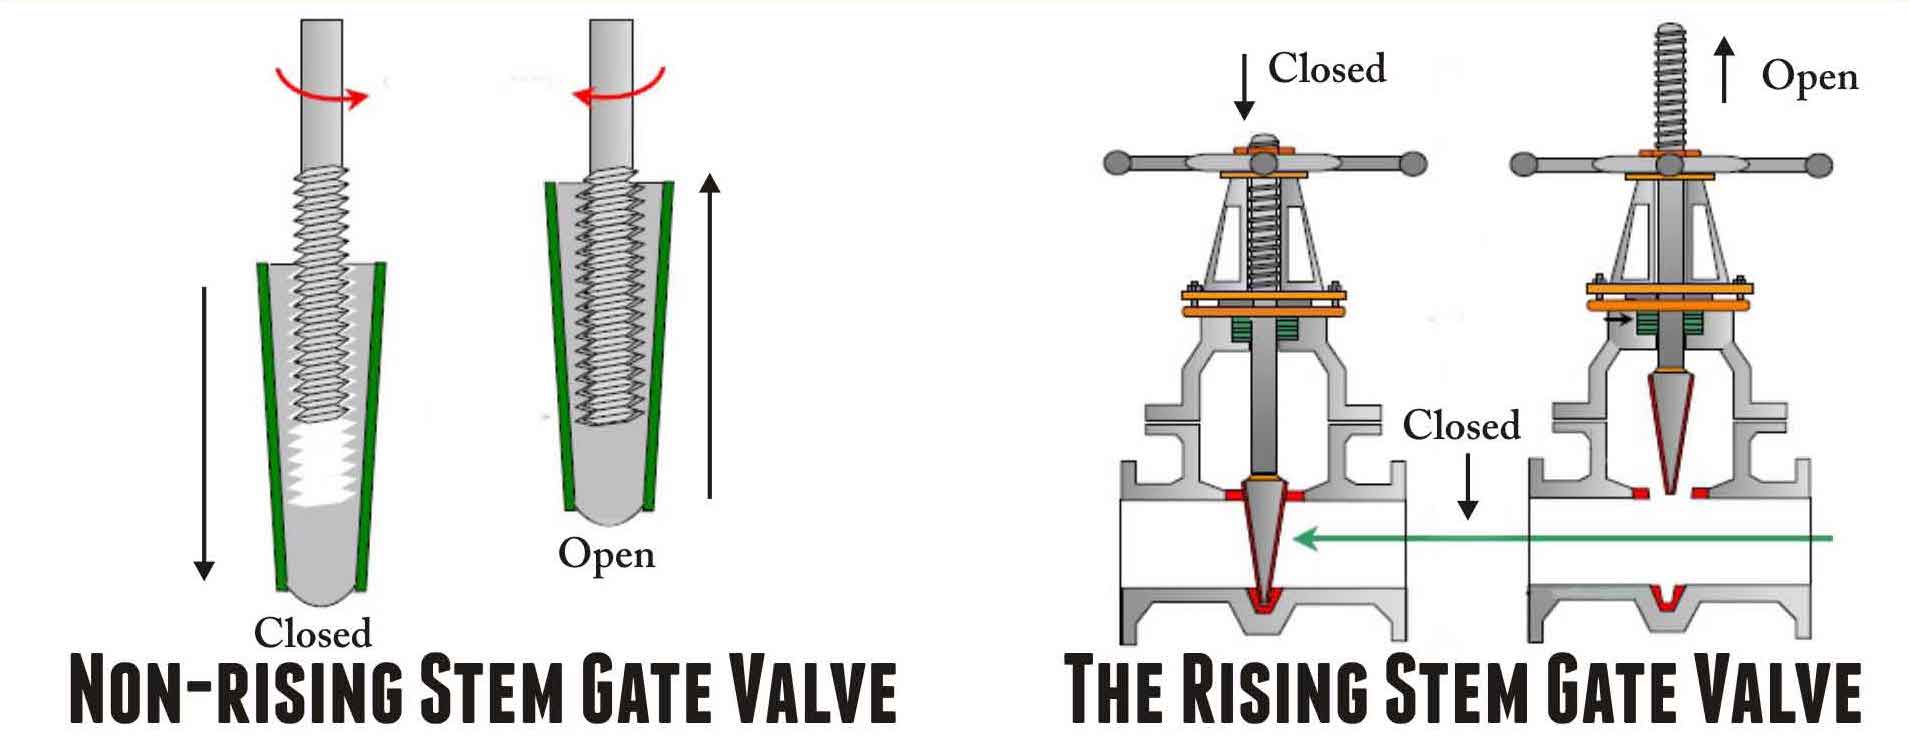 The Differences between Gate Valves with Rising Stem and Non-rising